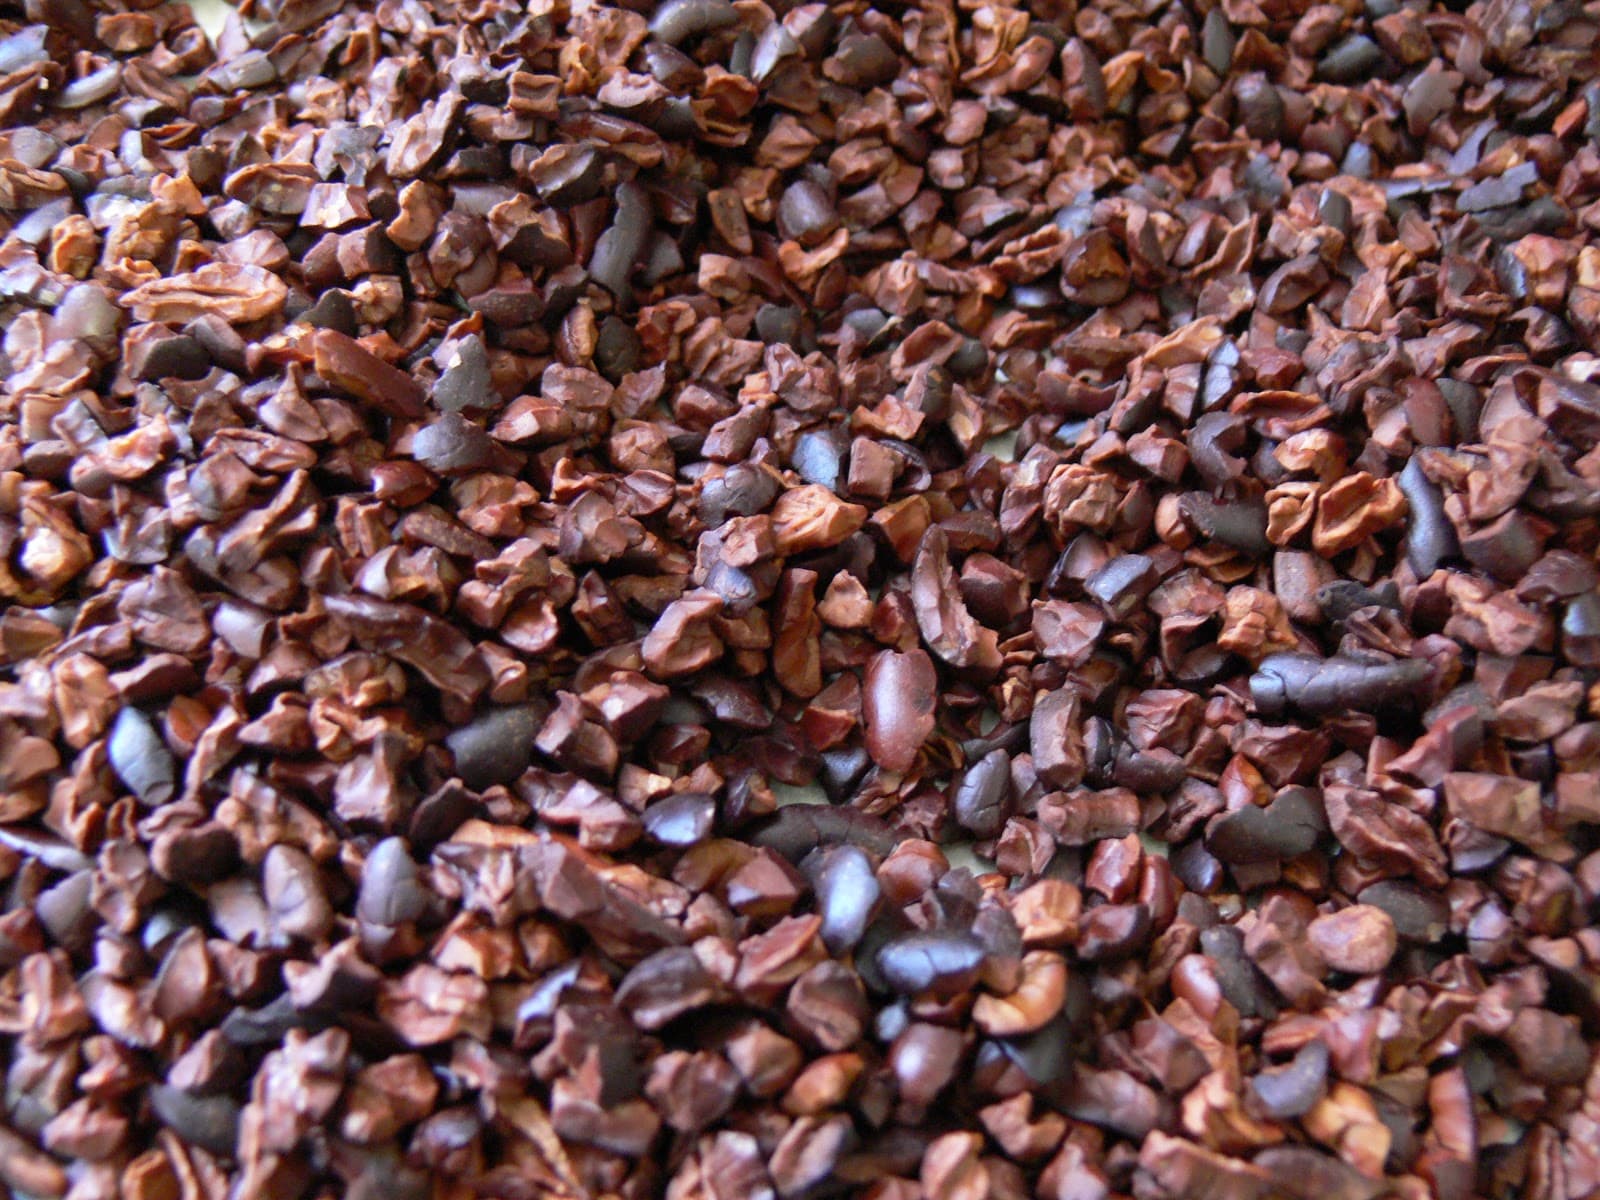 whatsapp 00 84 979 171 029 Cacao nibs from Viet nam